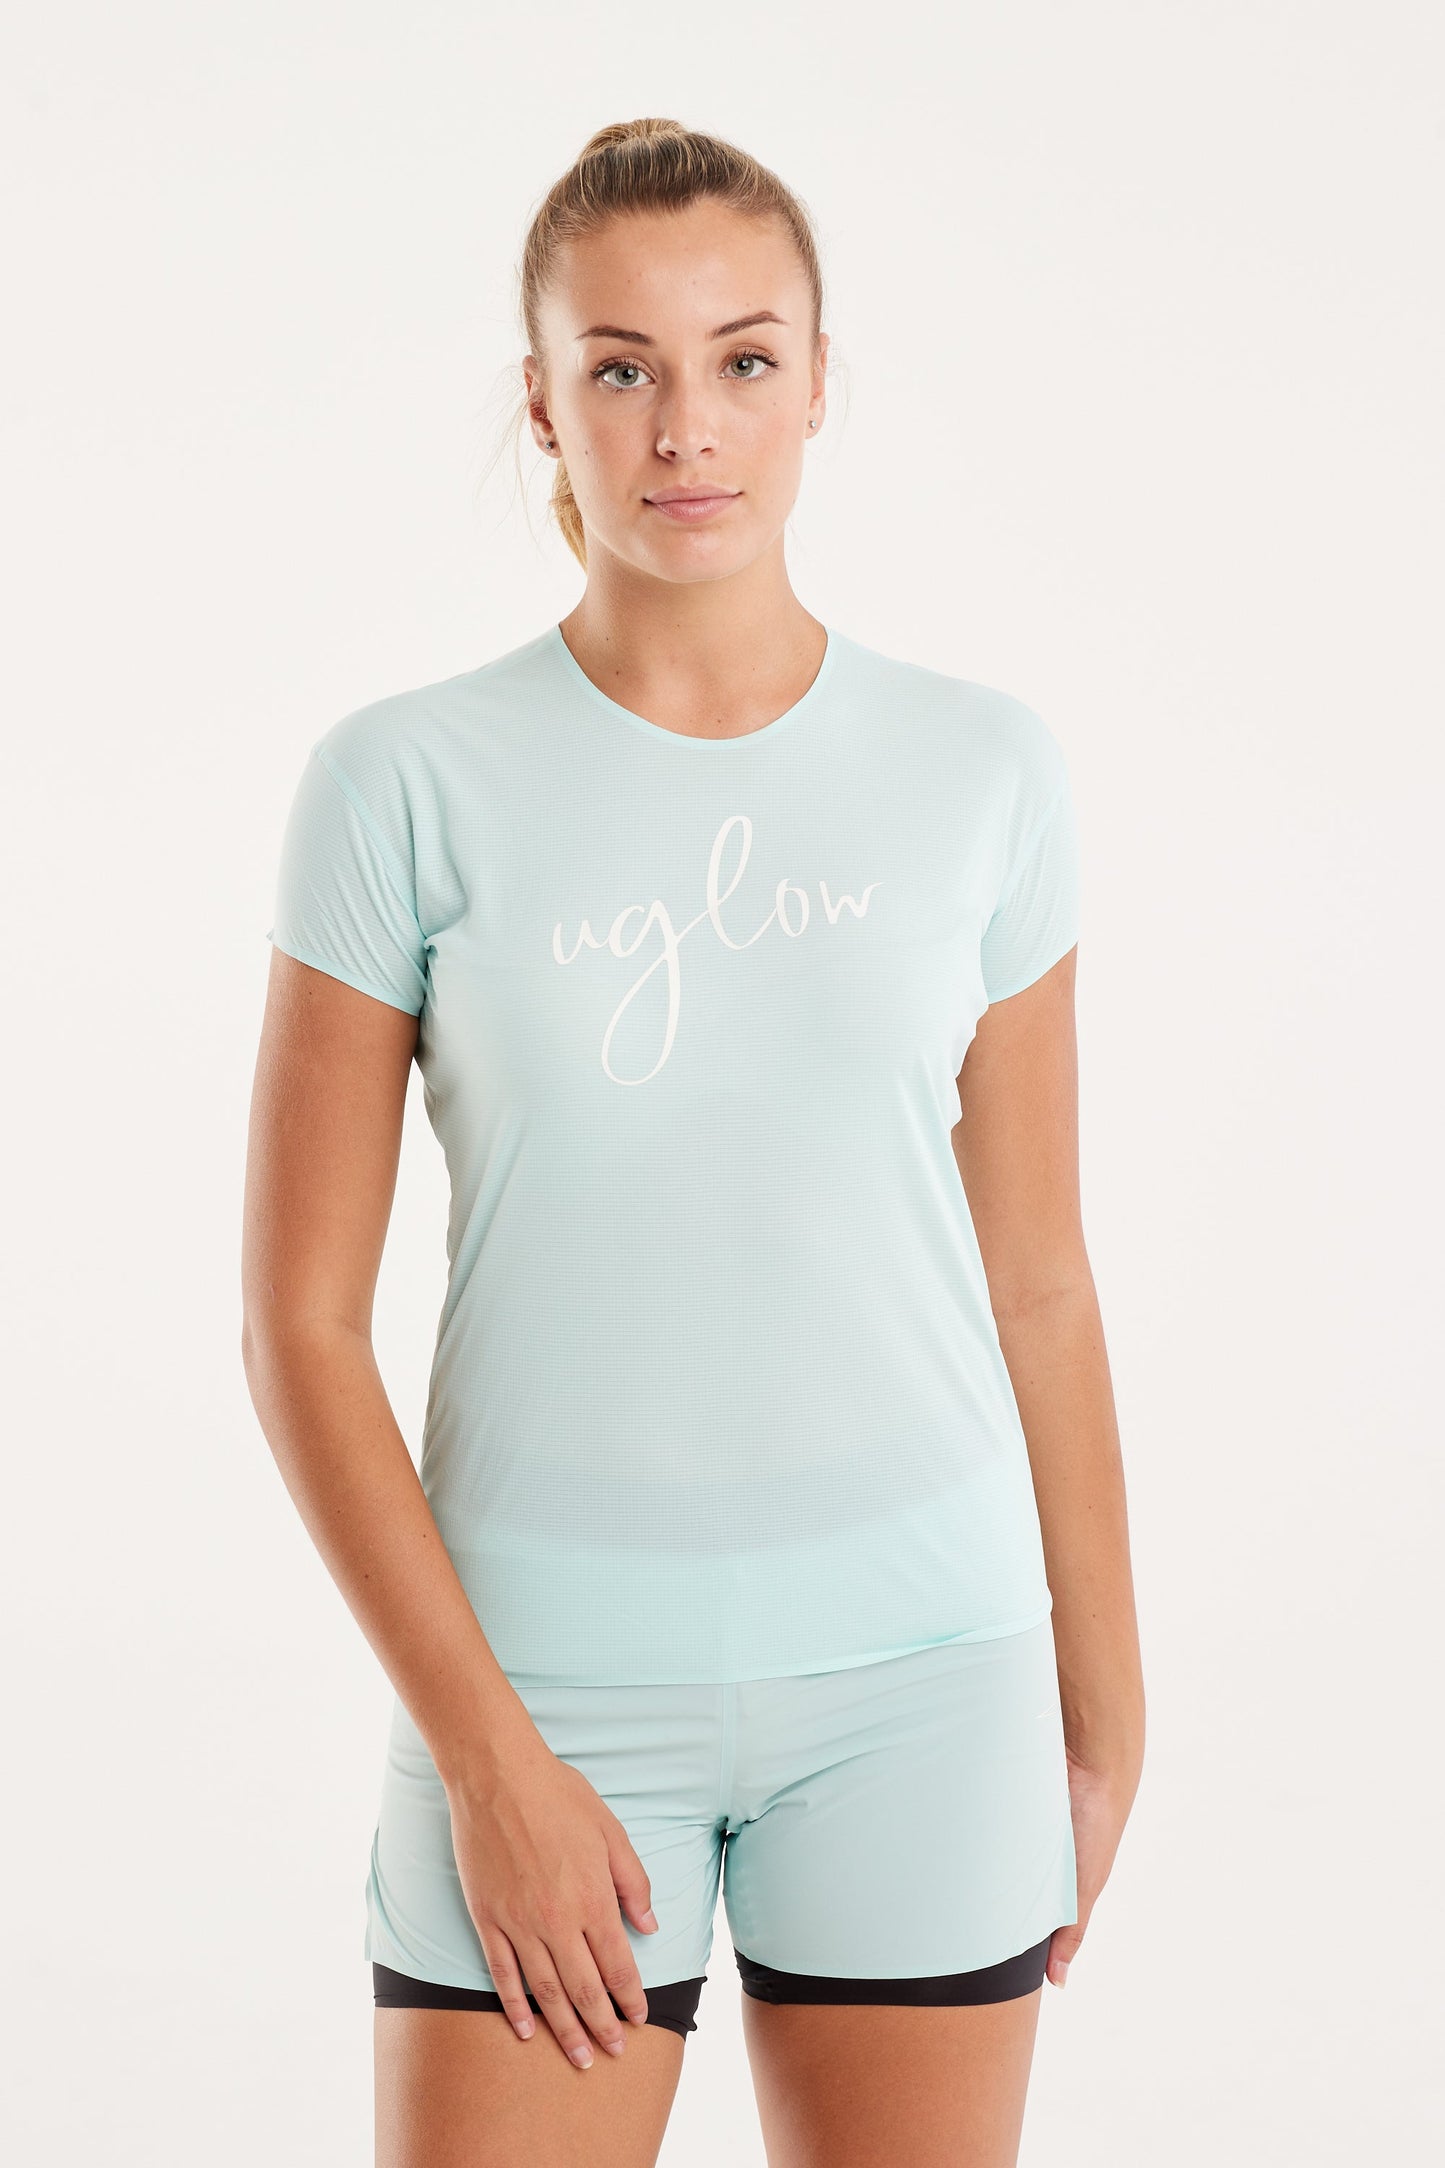 Uglow Women's Tee Super Light Recycled poly dyed - Bleached Aqua